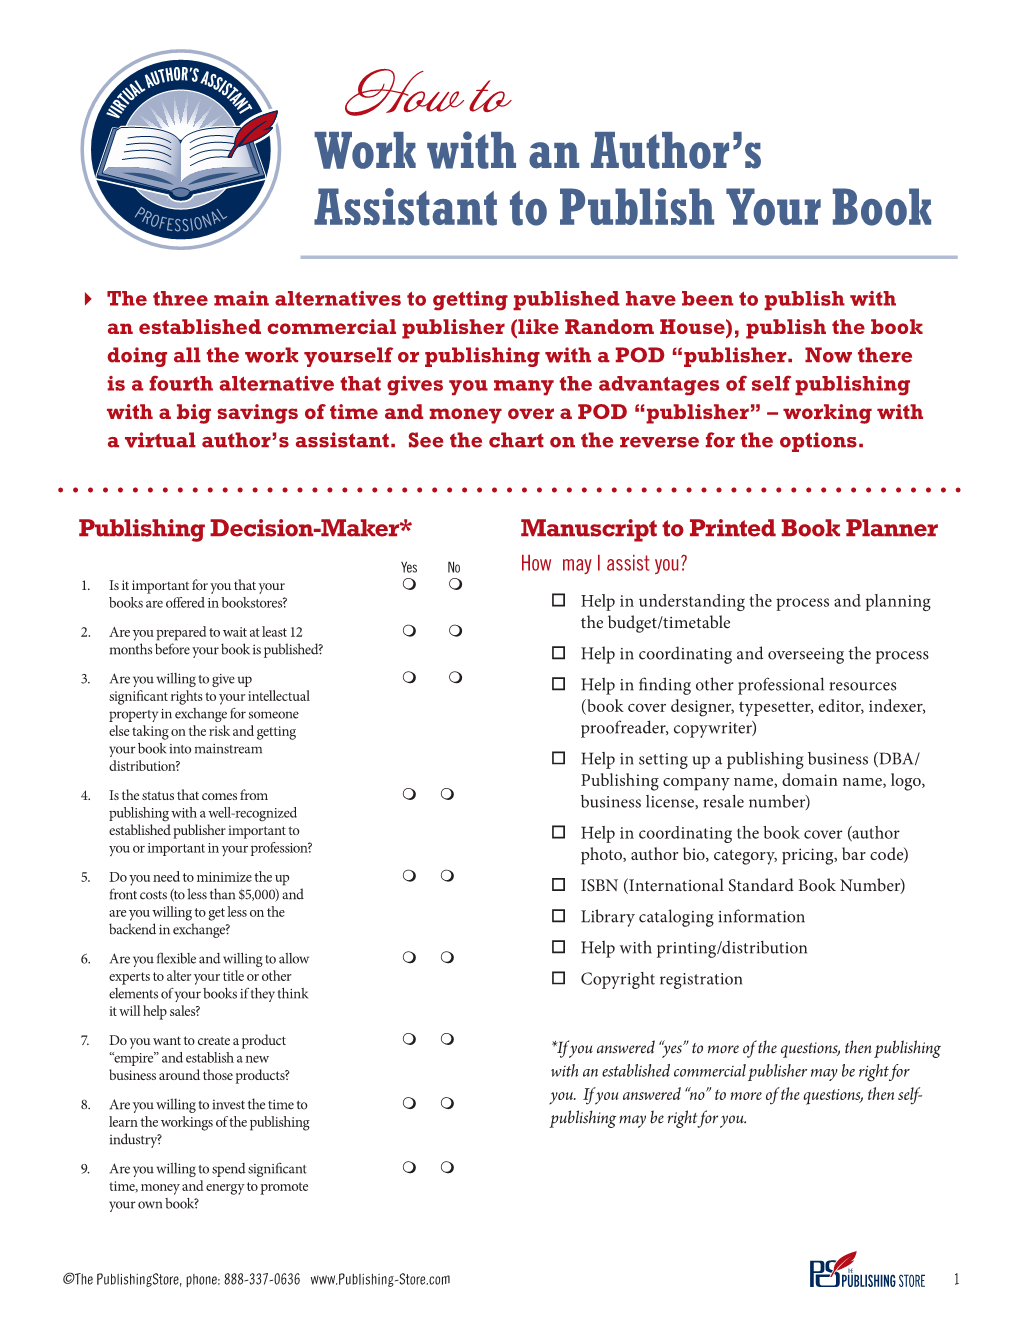 Work with an Author's Assistant to Publish Your Book